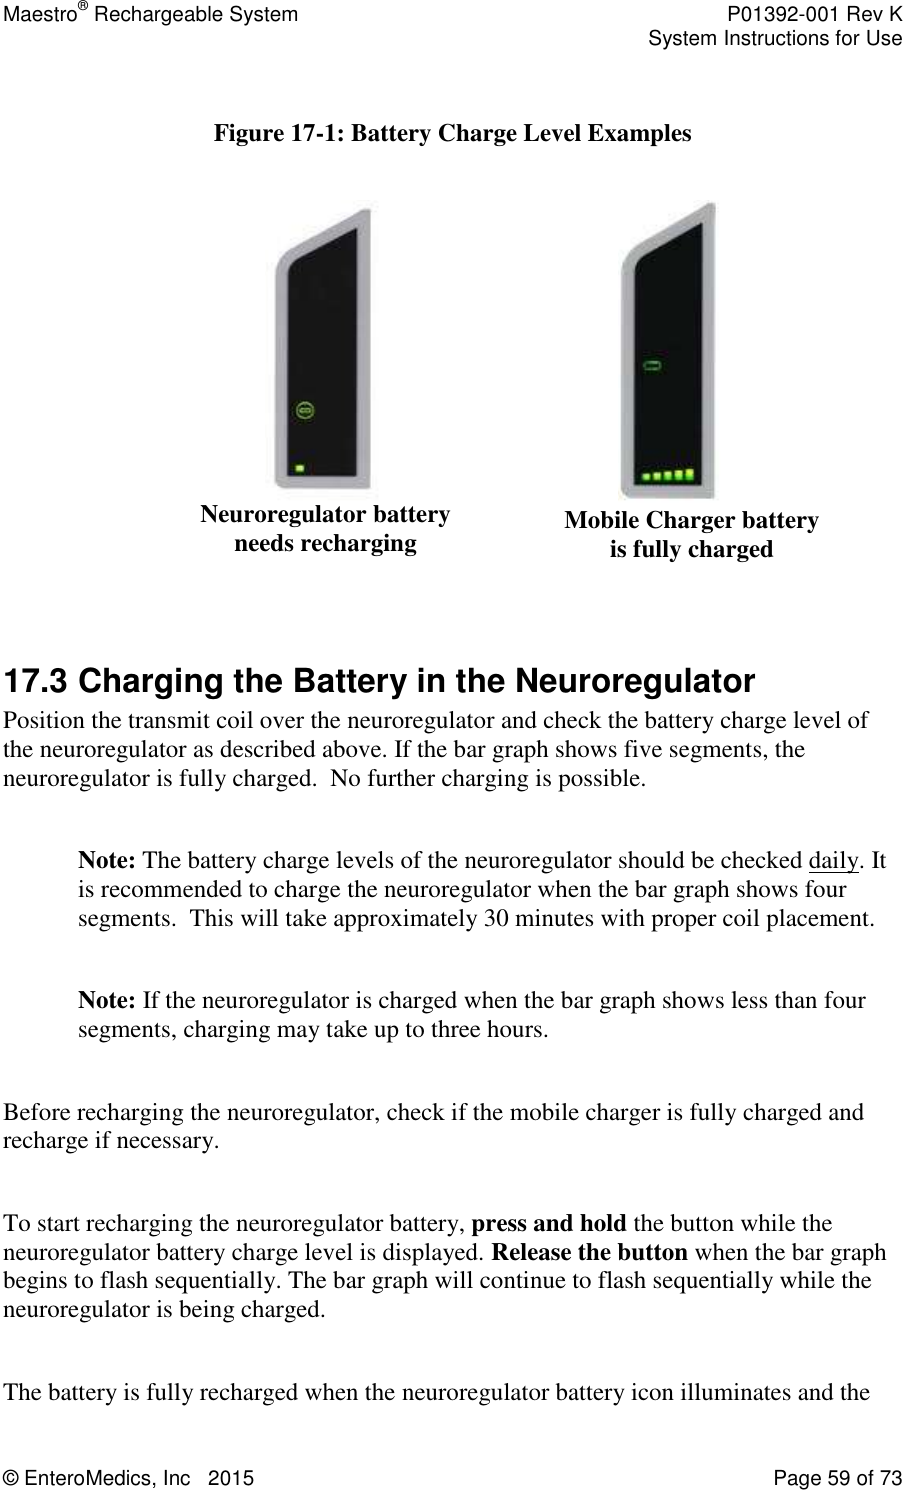 Maestro® Rechargeable System    P01392-001 Rev K     System Instructions for Use  © EnteroMedics, Inc   2015  Page 59 of 73   Figure 17-1: Battery Charge Level Examples                                              17.3 Charging the Battery in the Neuroregulator Position the transmit coil over the neuroregulator and check the battery charge level of the neuroregulator as described above. If the bar graph shows five segments, the neuroregulator is fully charged.  No further charging is possible.   Note: The battery charge levels of the neuroregulator should be checked daily. It is recommended to charge the neuroregulator when the bar graph shows four segments.  This will take approximately 30 minutes with proper coil placement.   Note: If the neuroregulator is charged when the bar graph shows less than four segments, charging may take up to three hours.  Before recharging the neuroregulator, check if the mobile charger is fully charged and recharge if necessary.  To start recharging the neuroregulator battery, press and hold the button while the neuroregulator battery charge level is displayed. Release the button when the bar graph begins to flash sequentially. The bar graph will continue to flash sequentially while the neuroregulator is being charged.   The battery is fully recharged when the neuroregulator battery icon illuminates and the Neuroregulator battery needs recharging Mobile Charger battery  is fully charged 